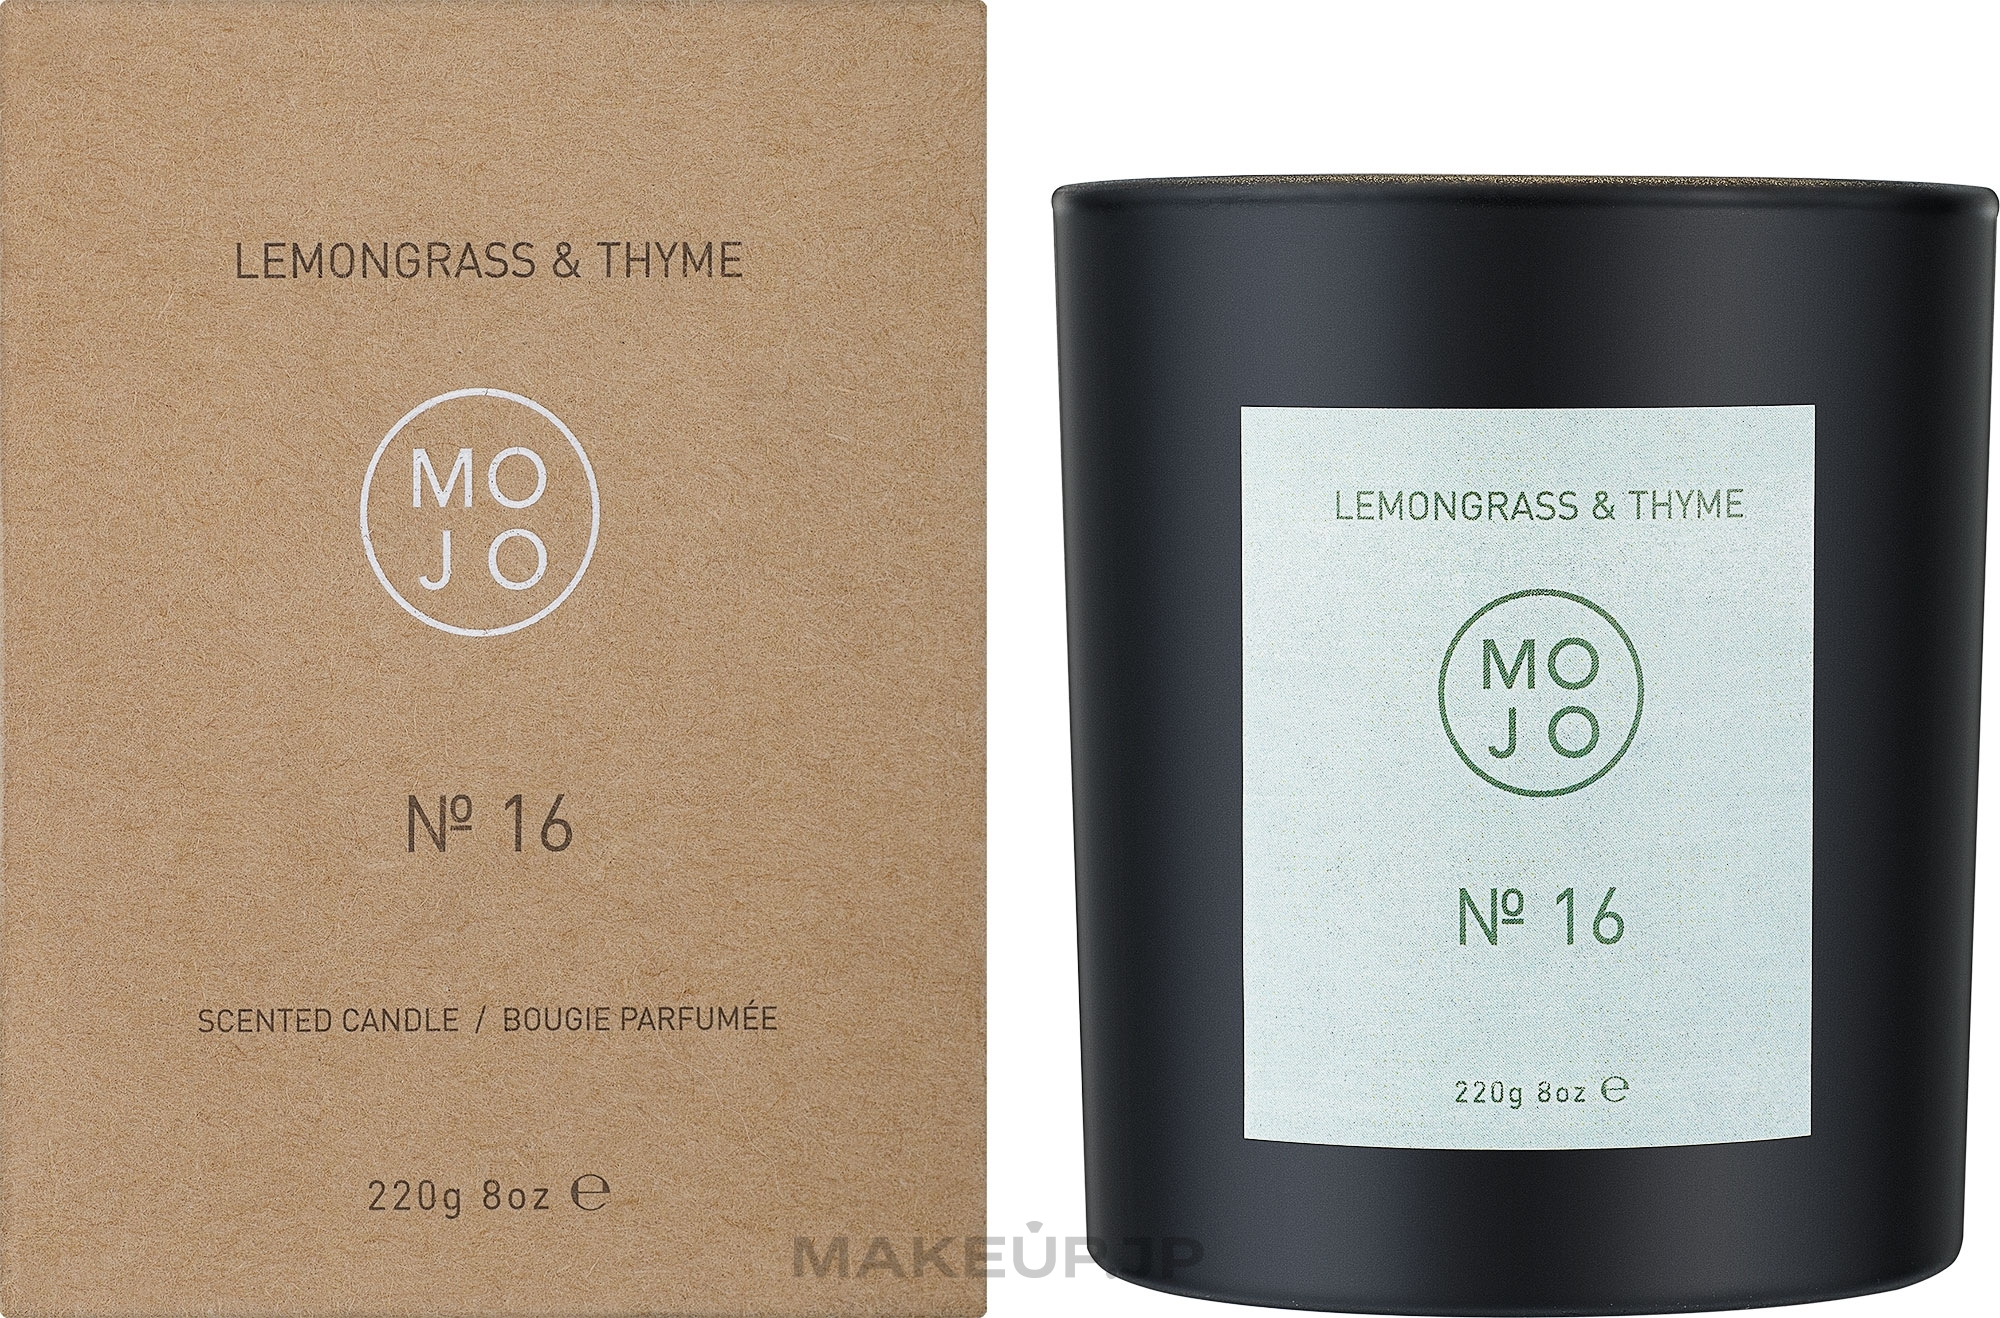 Mojo Lemongrass & Thyme №16 - Scented Candle — photo 220 g